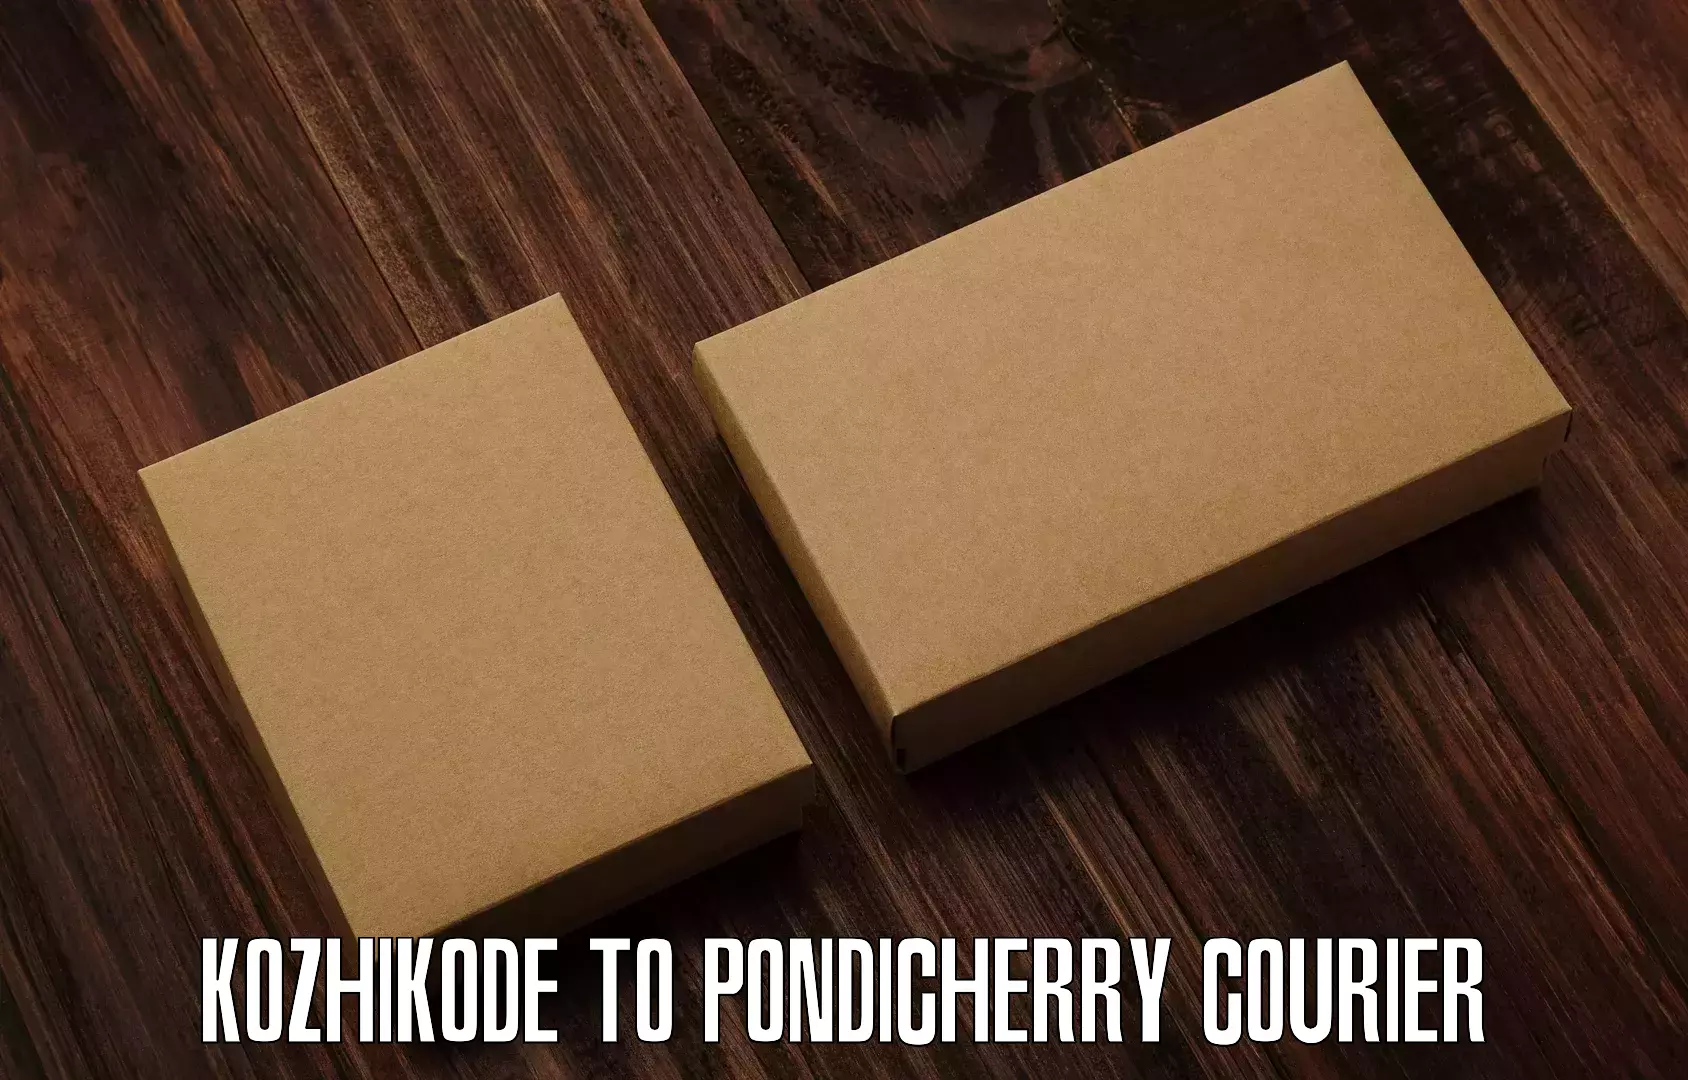 Parcel handling and care Kozhikode to Pondicherry